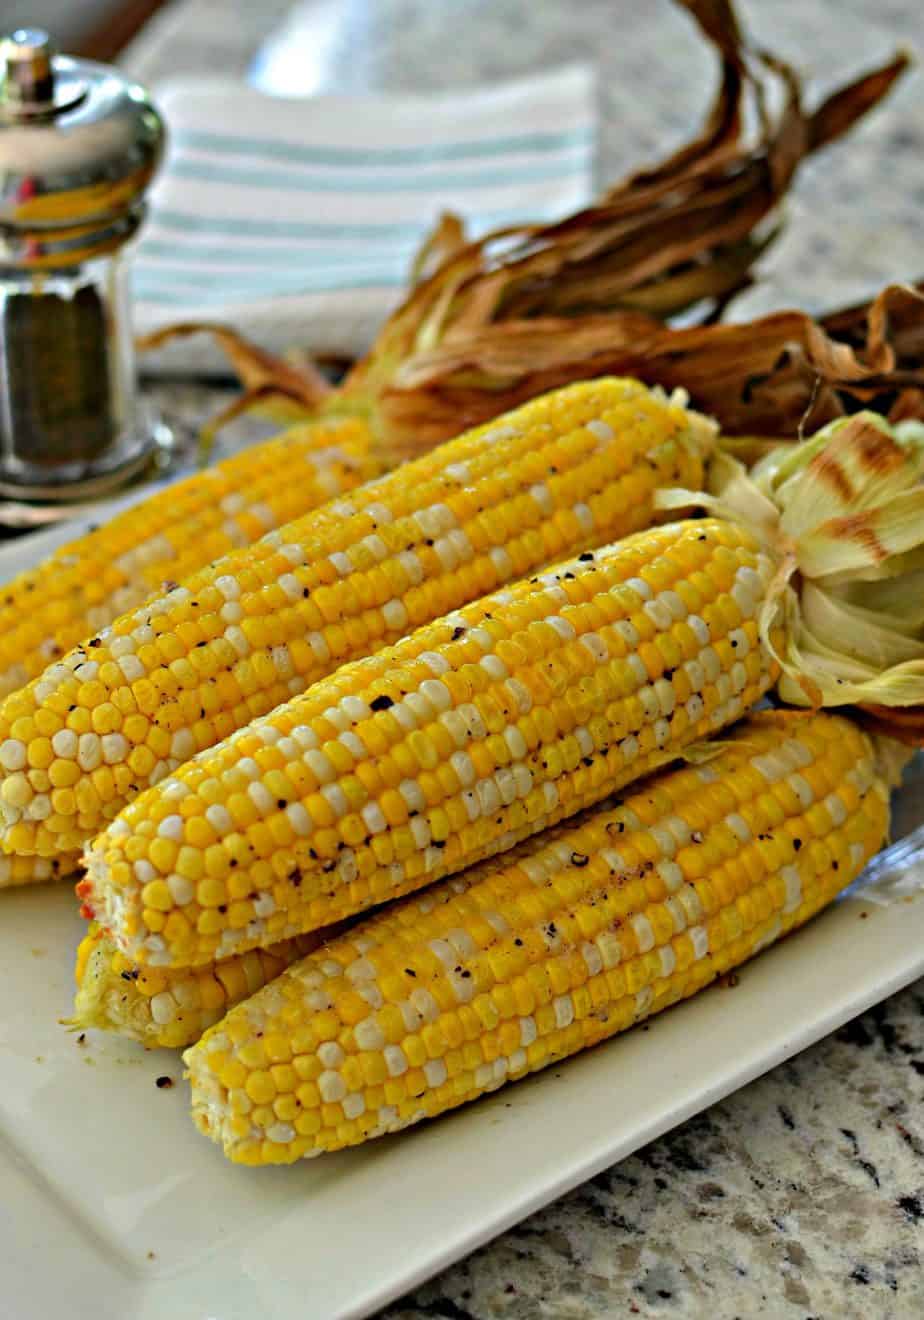 Perfectly seasoned, salty, buttery corn pairs perfectly with anything from barbecue to fresh summer salads and more.